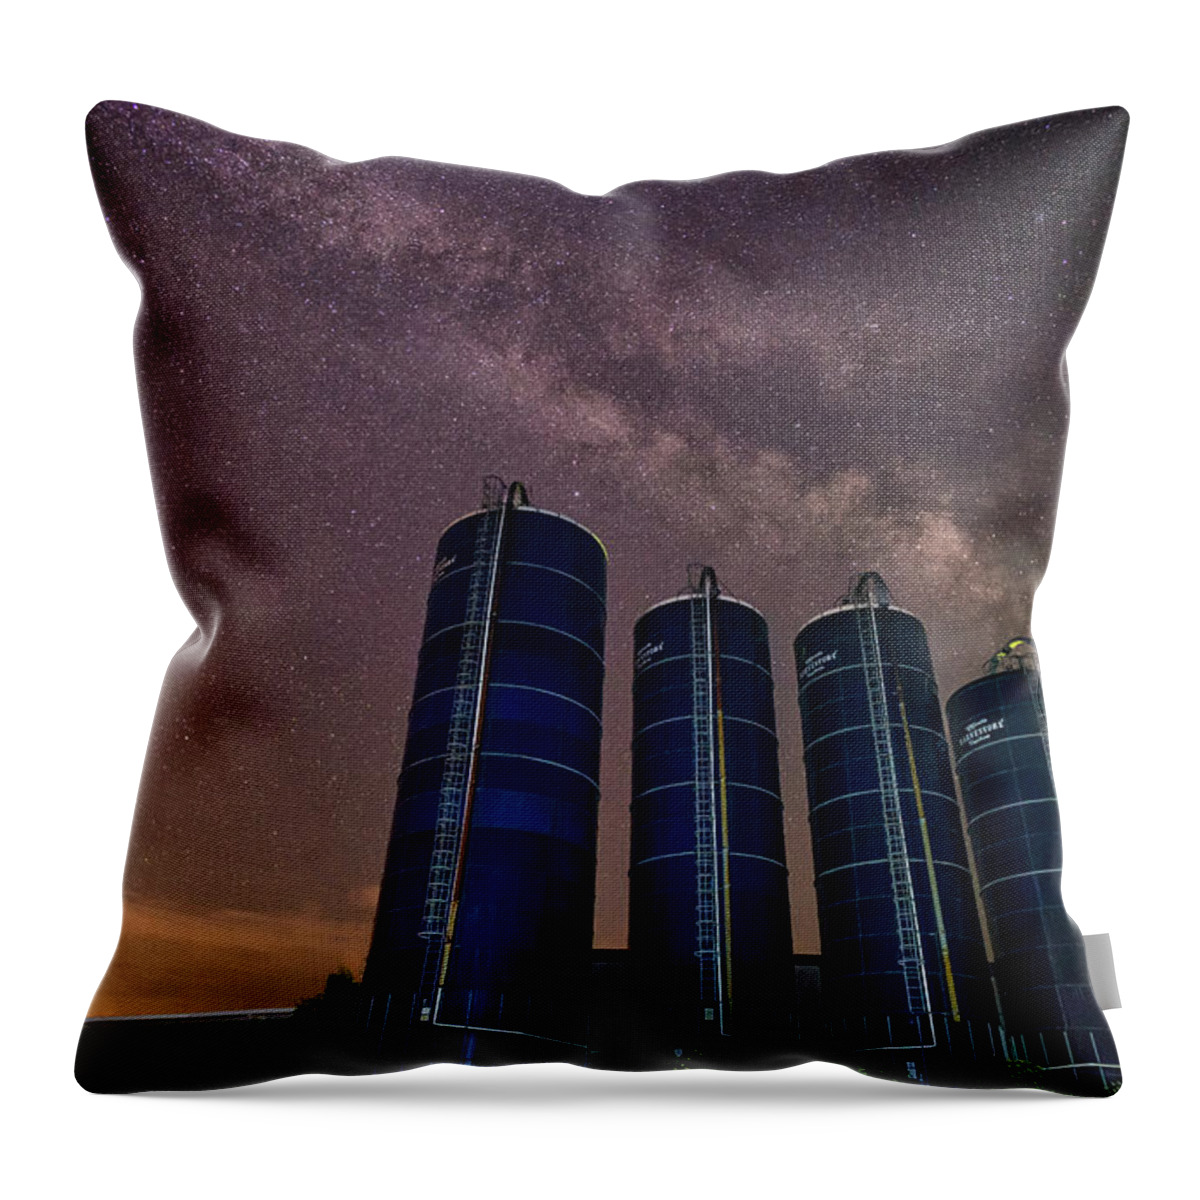 A Night At The Farm Throw Pillow featuring the photograph A Night at the Farm 2 by Mark Papke